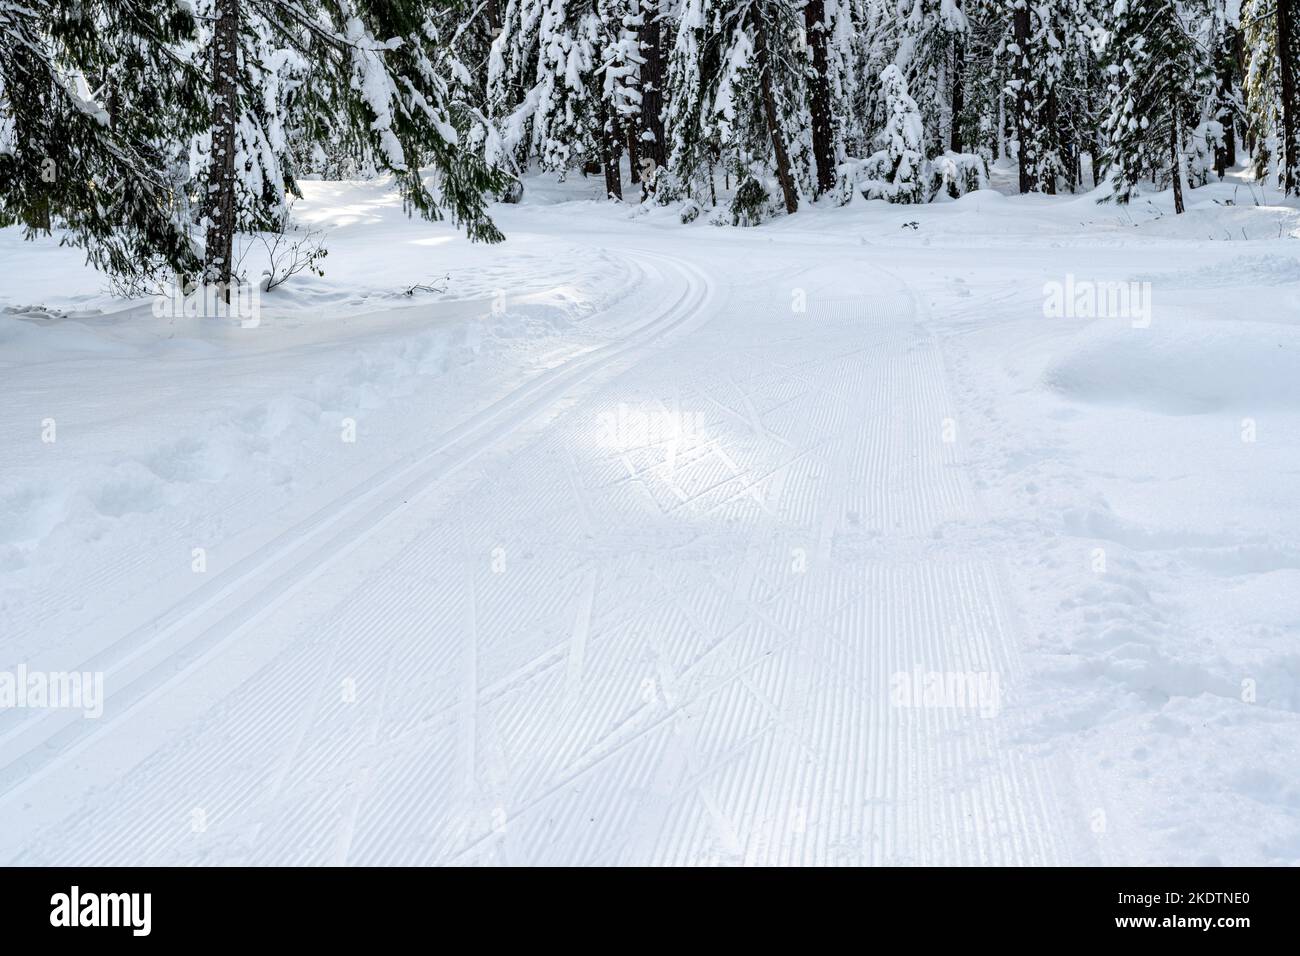 Groomed Cross-Country Ski Tracks in the Mountains Stock Photo